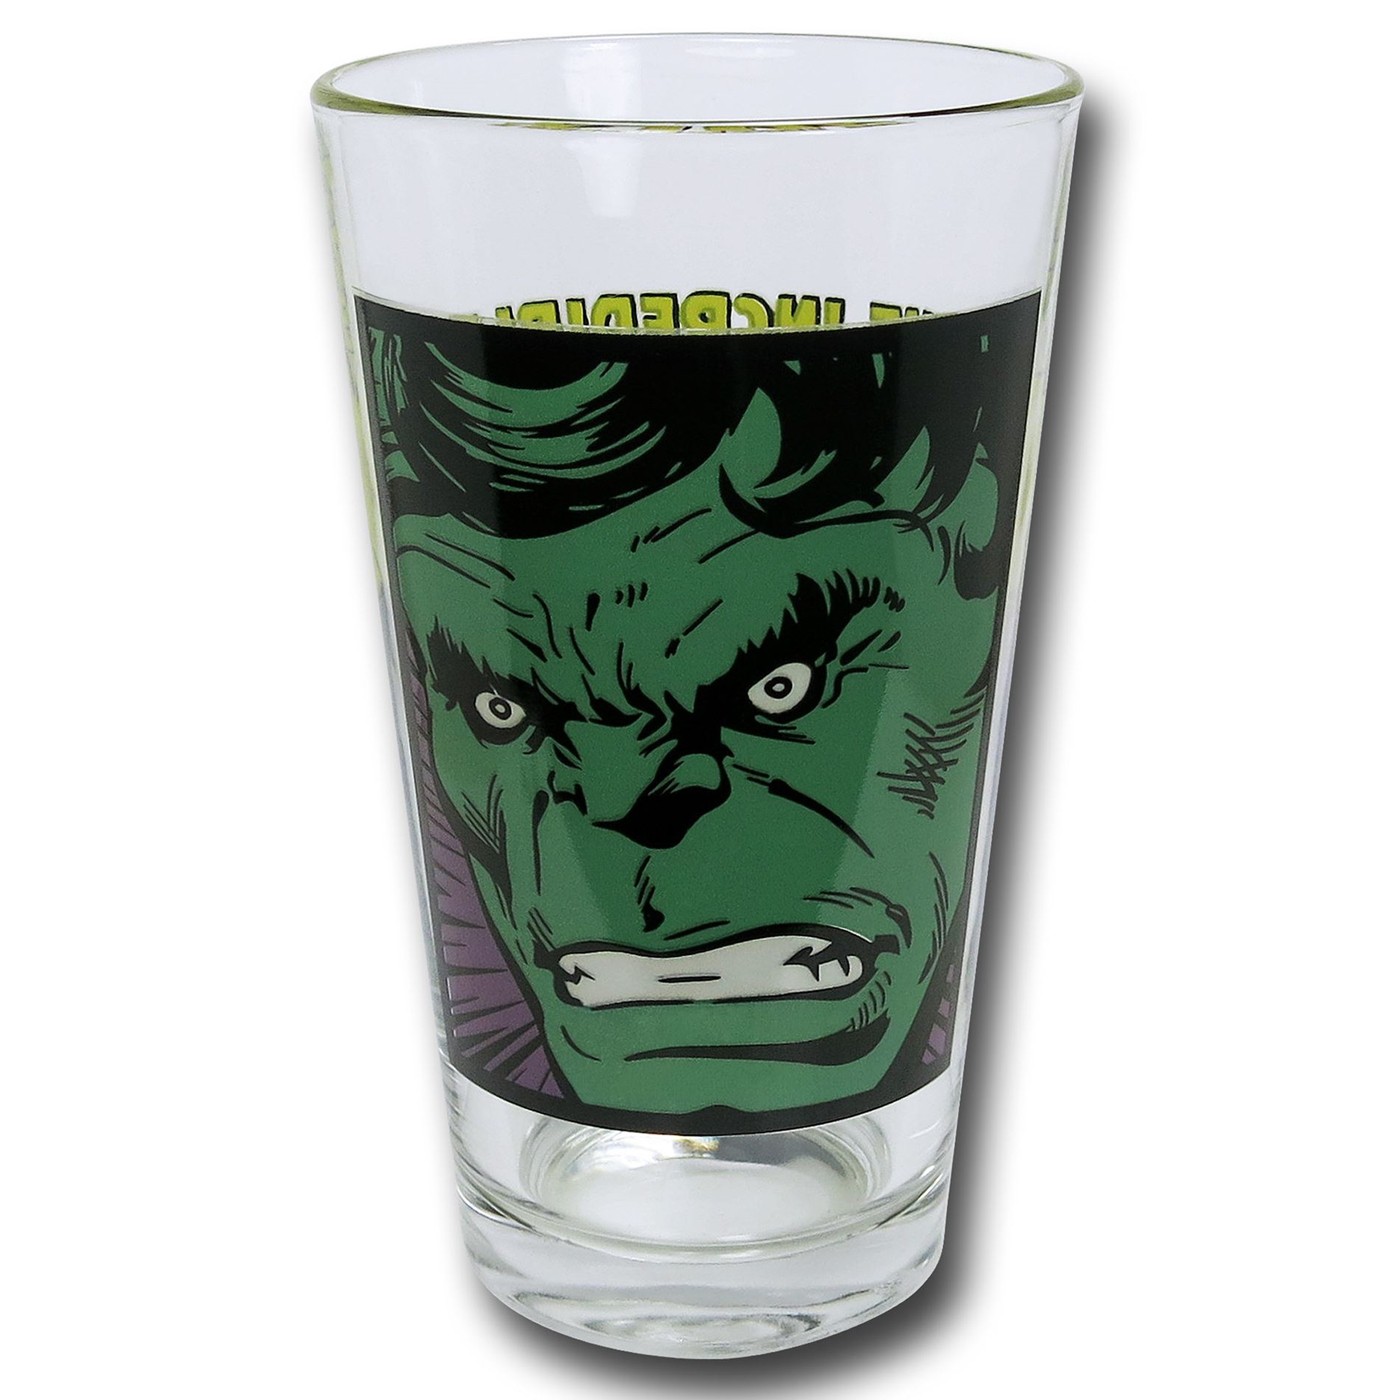 Marvel Close-Up Pint Glass 4-Pack